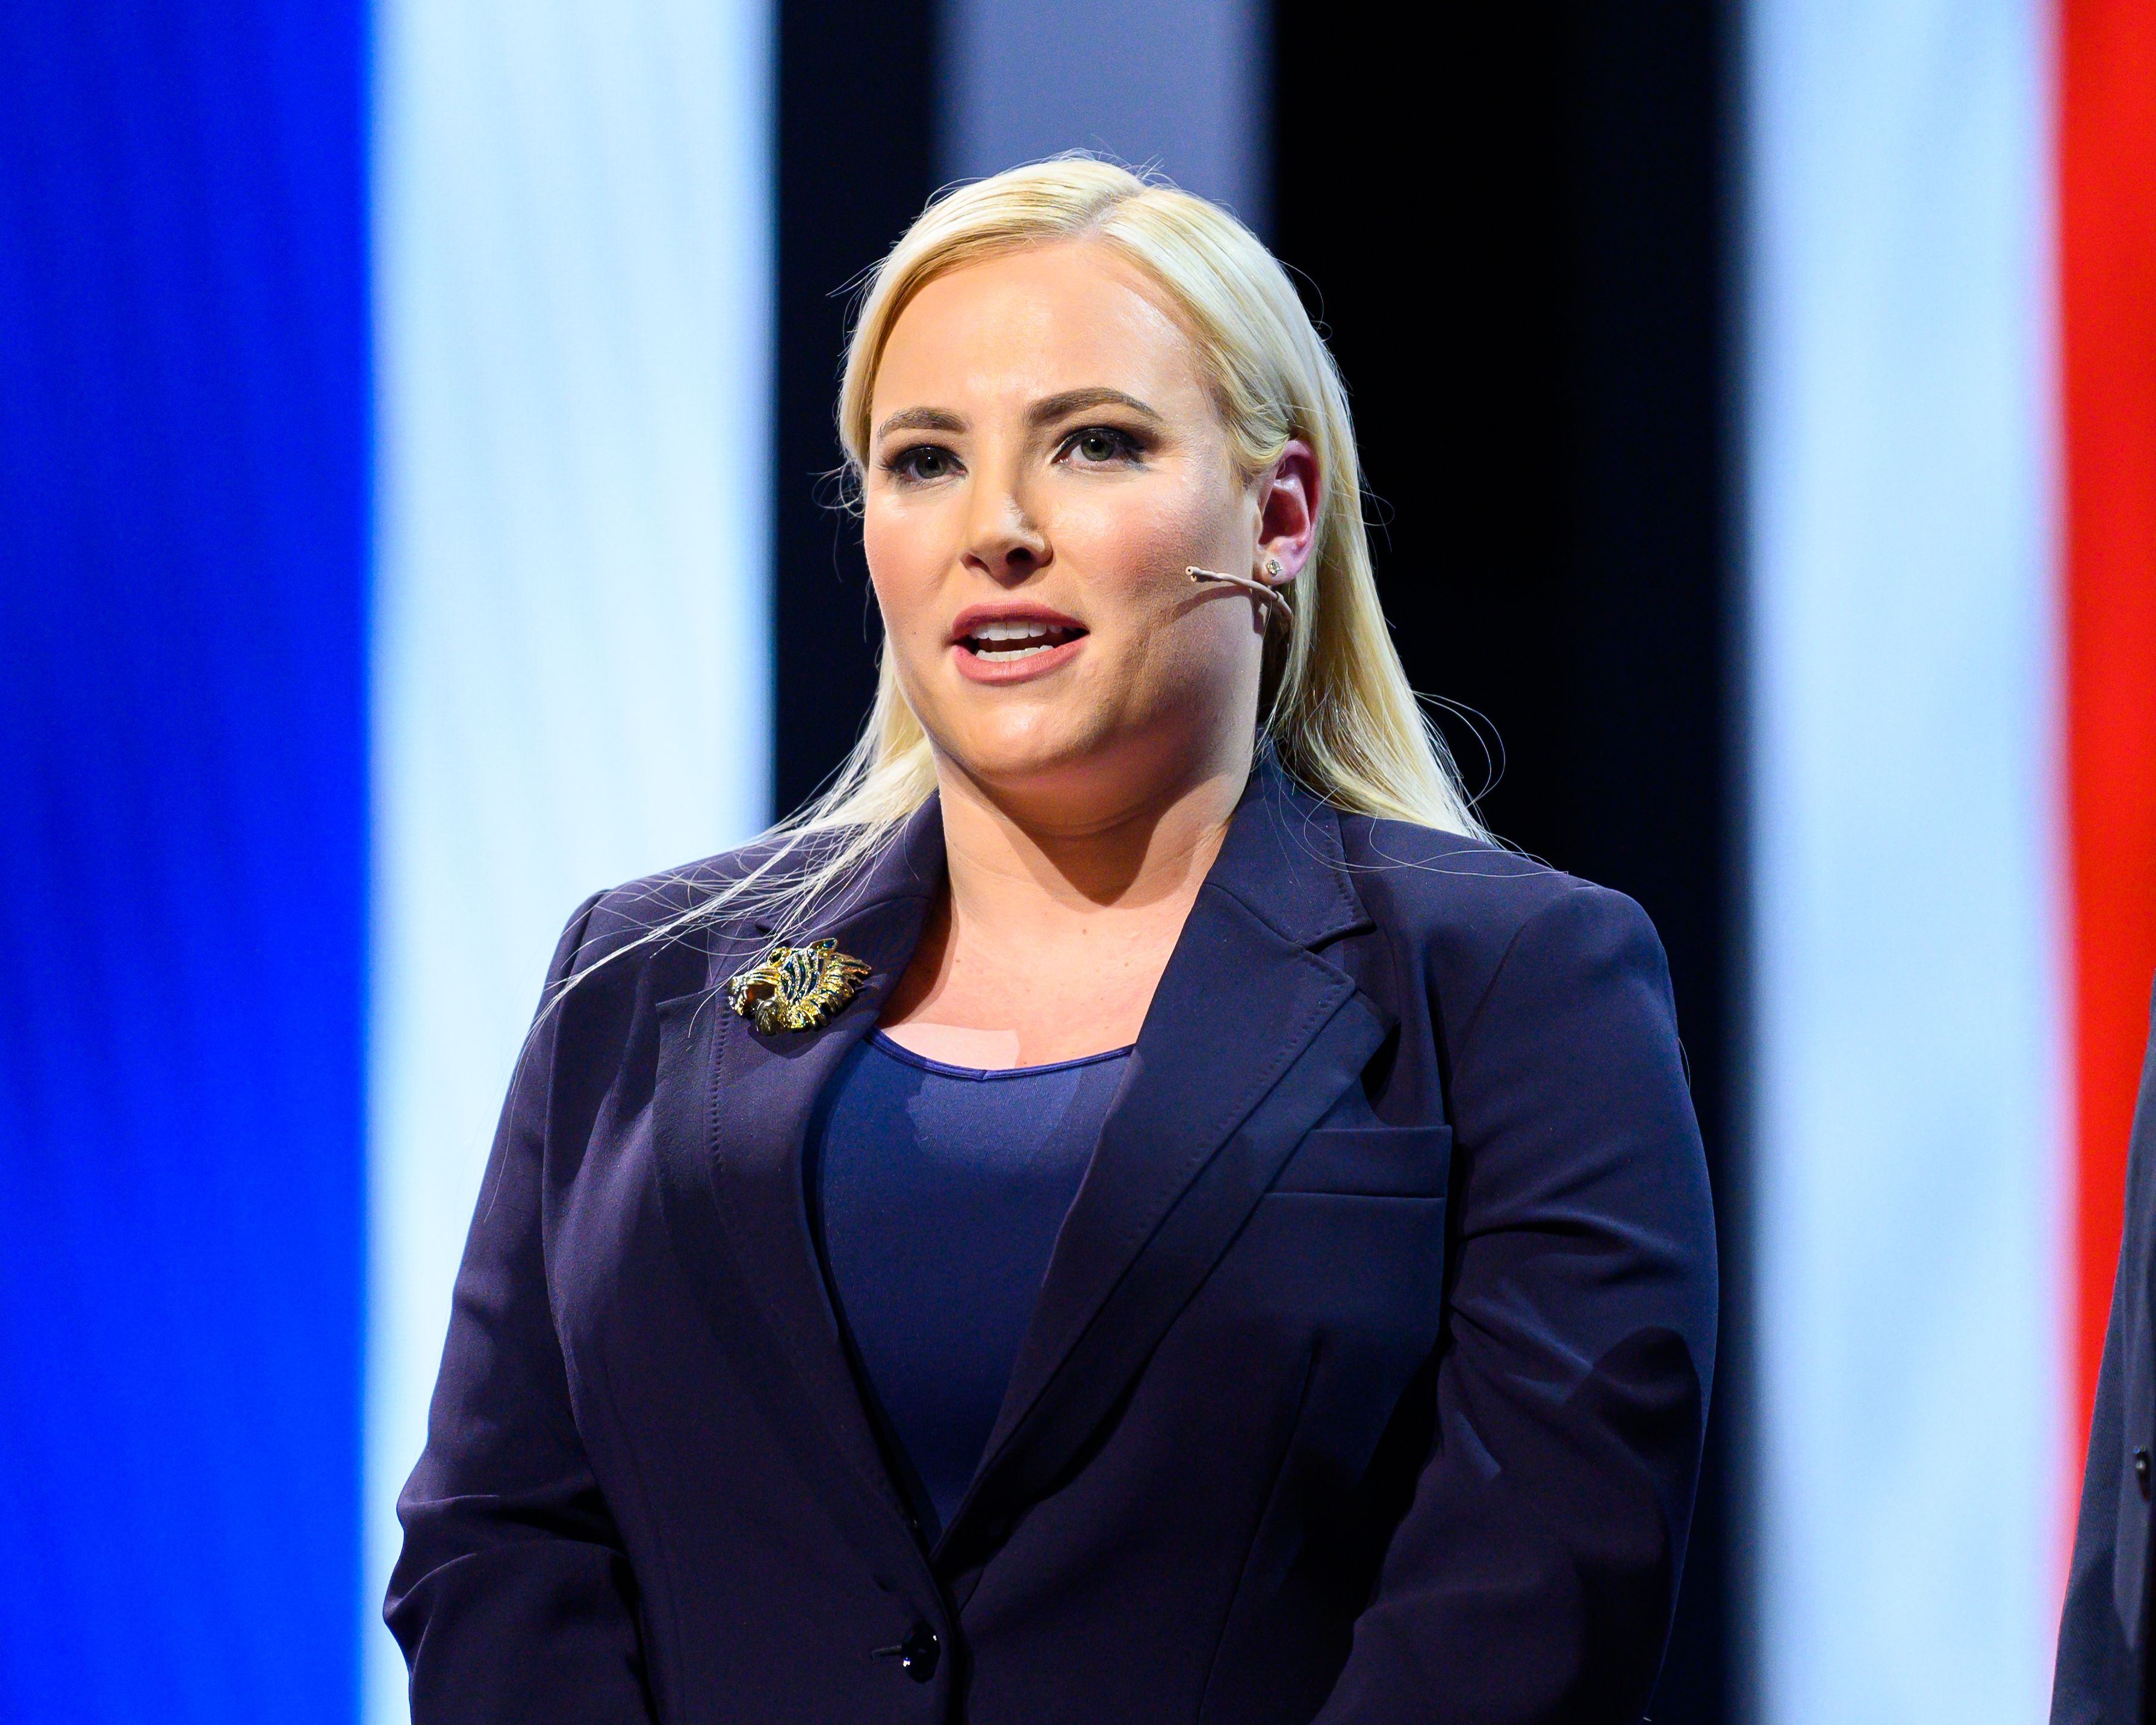 Meghan McCain speaks during the American Israel Public Affairs Committee (AIPAC) Policy Conference in Washington DC. on March 26, 2019 | Photo: Michael Brochstein/SOPA Images/LightRocket/Getty Images